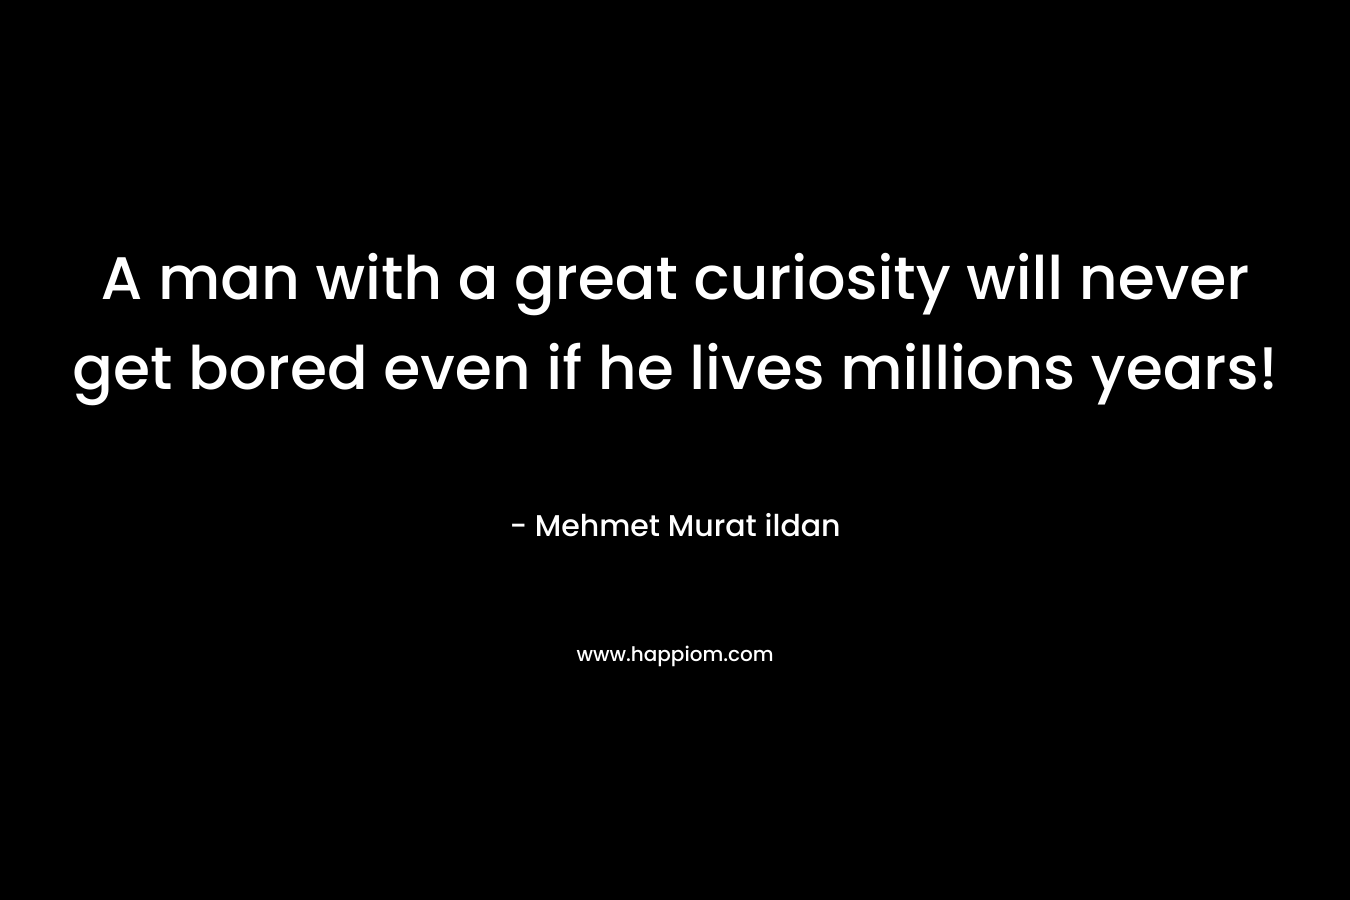 A man with a great curiosity will never get bored even if he lives millions years! – Mehmet Murat ildan